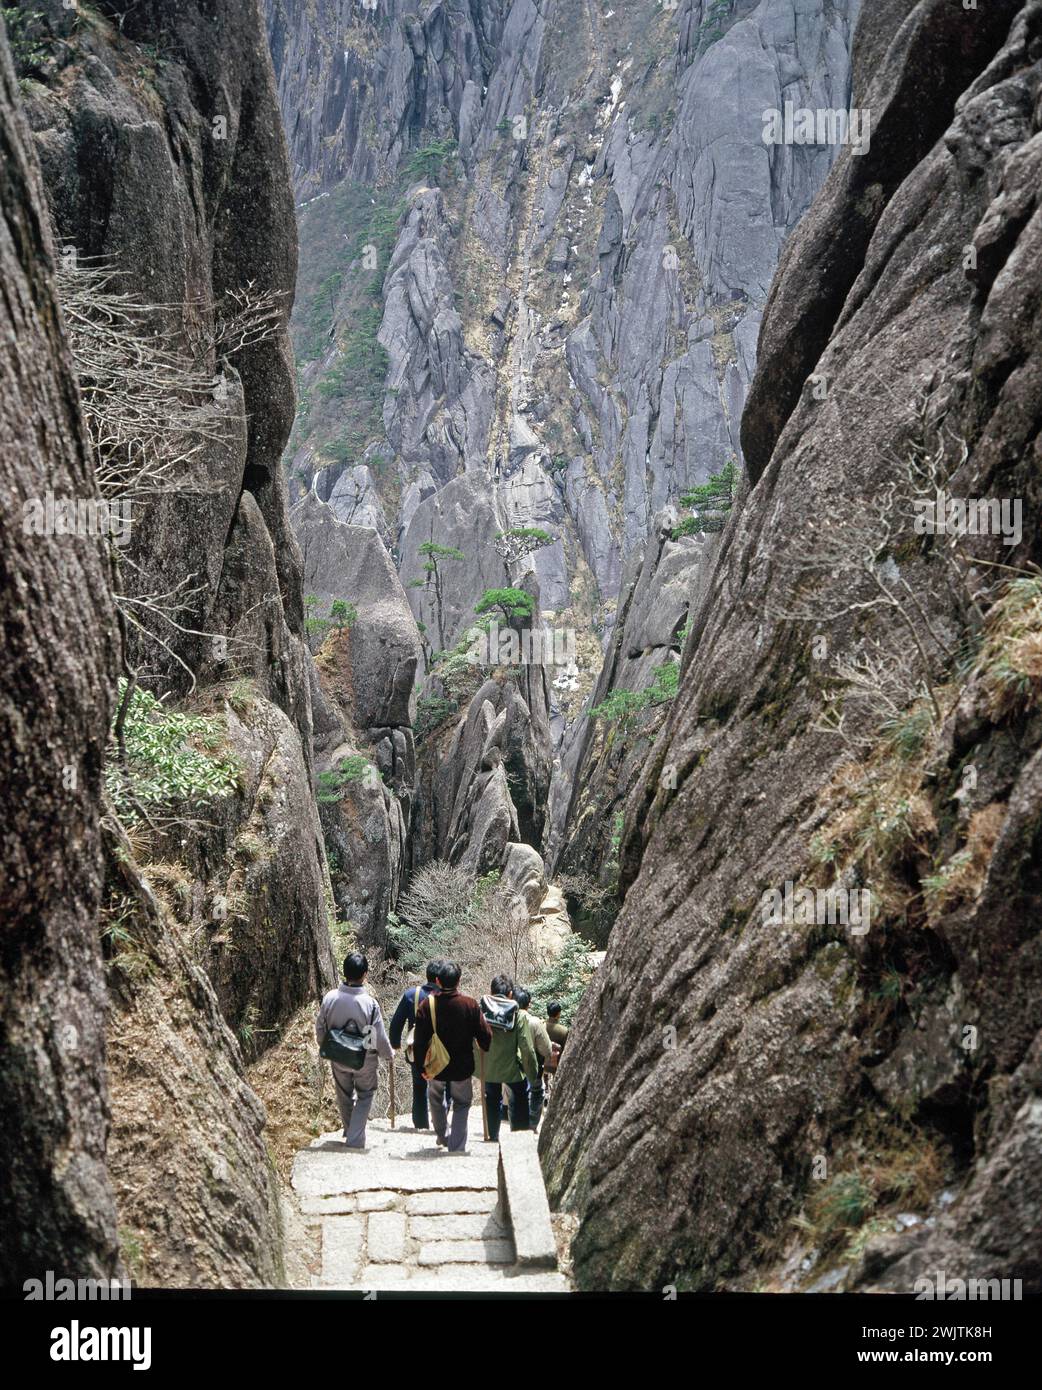 China. Anhui province. Huangshan Mountains. Group of Chinese men descending Jade Screen Tower steps. Stock Photo